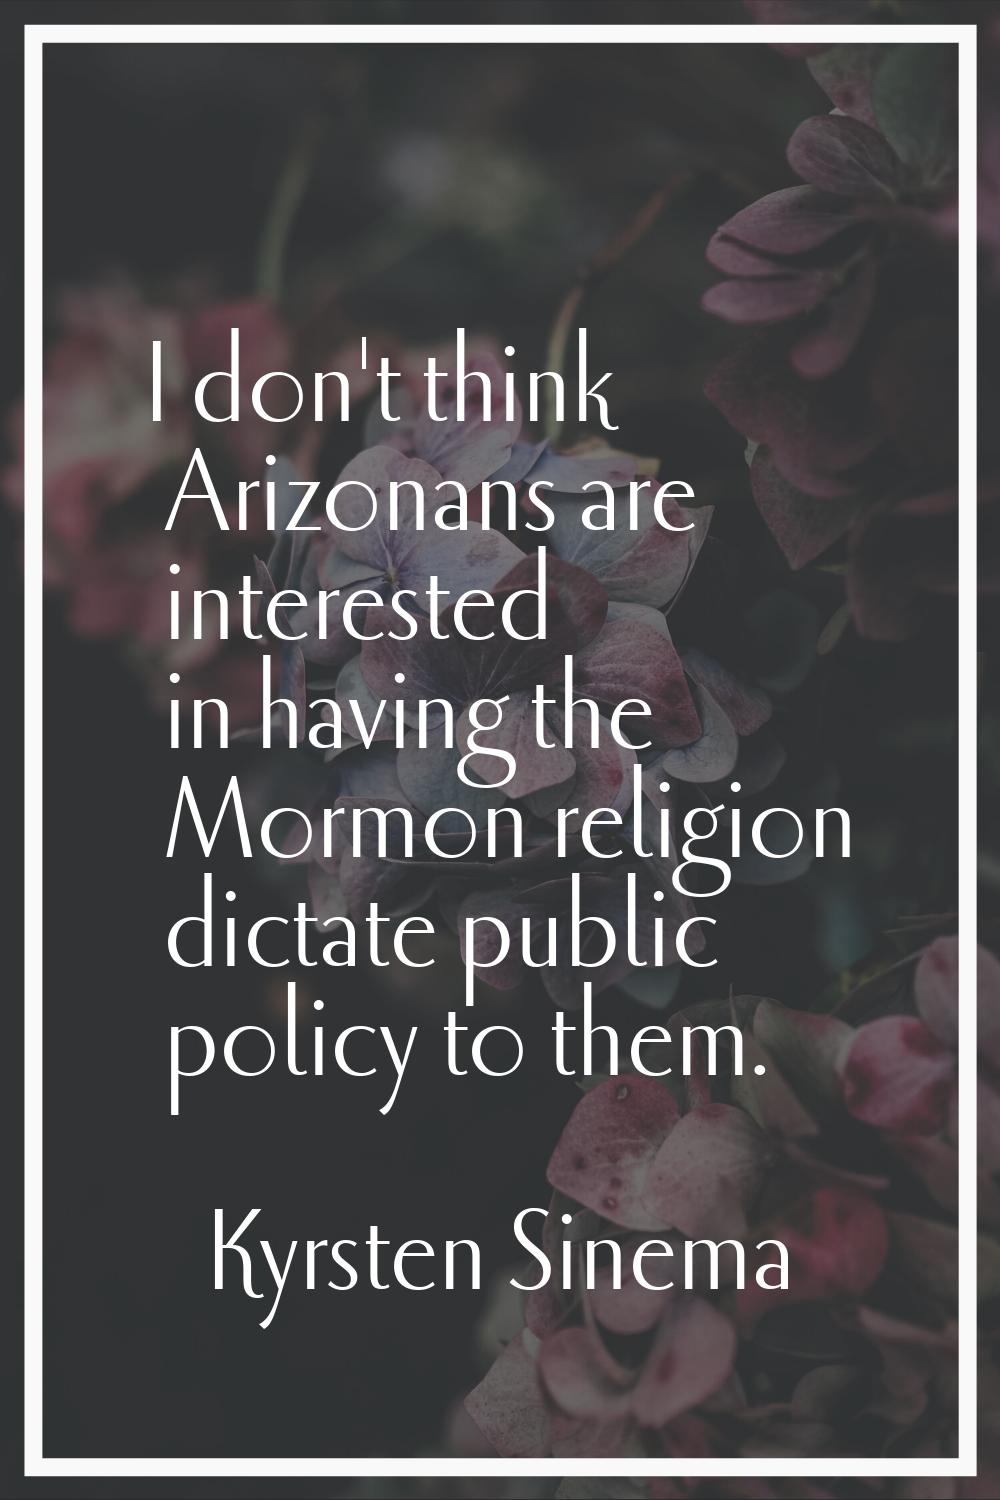 I don't think Arizonans are interested in having the Mormon religion dictate public policy to them.